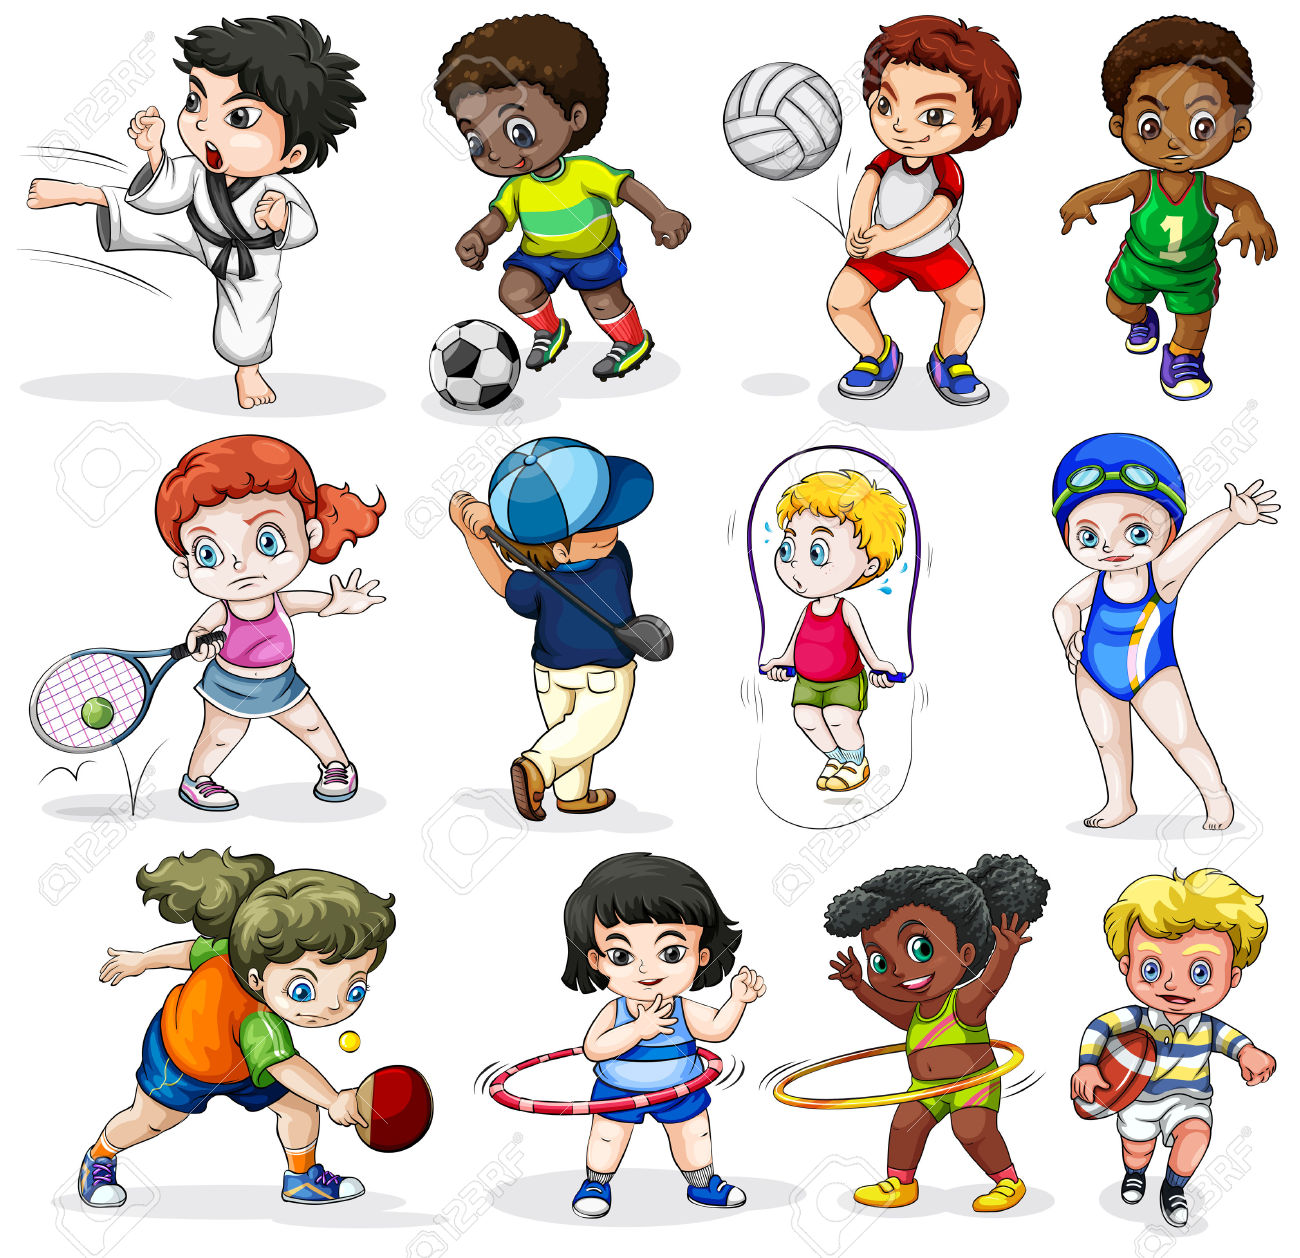 free sports vector clipart - photo #40